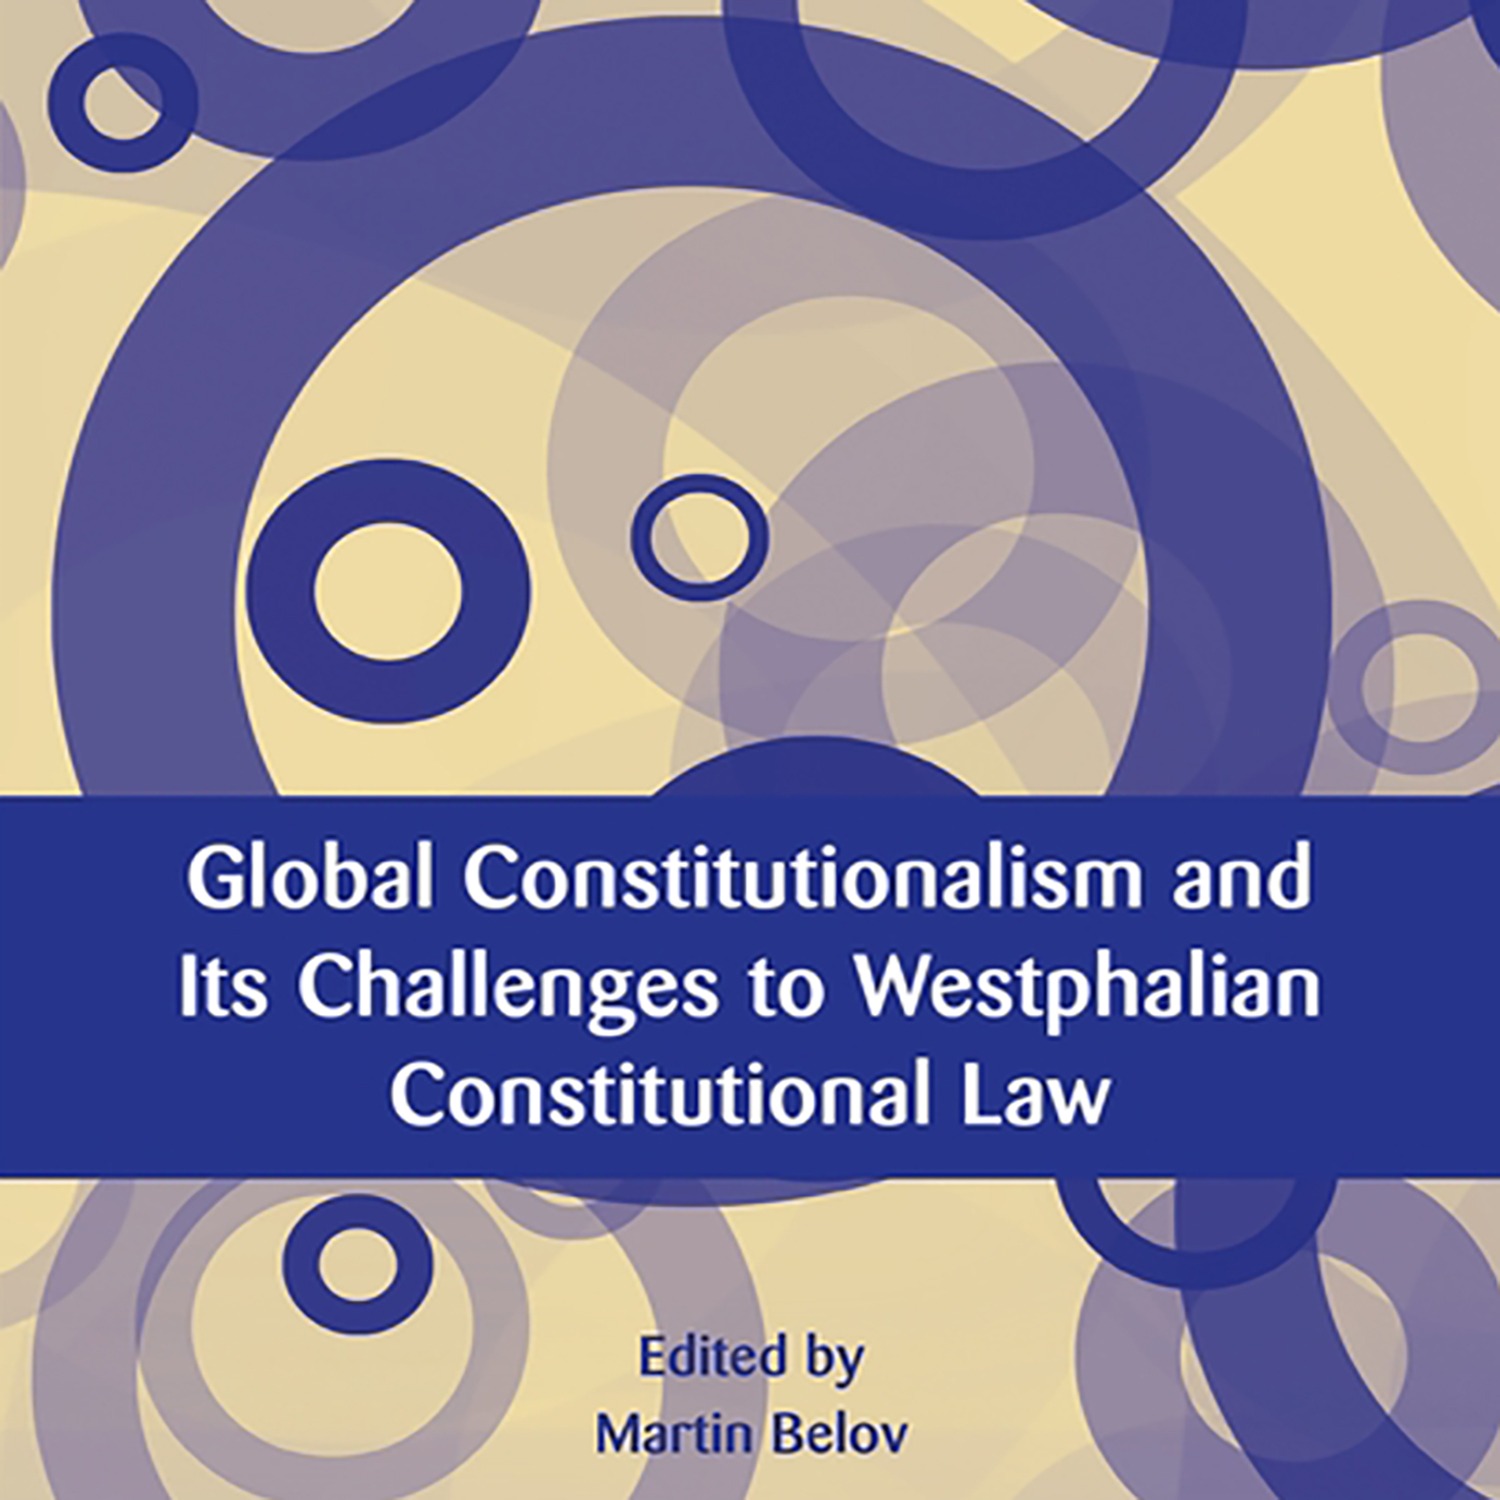 Just published – Counter-developments to Global Constitutionalism